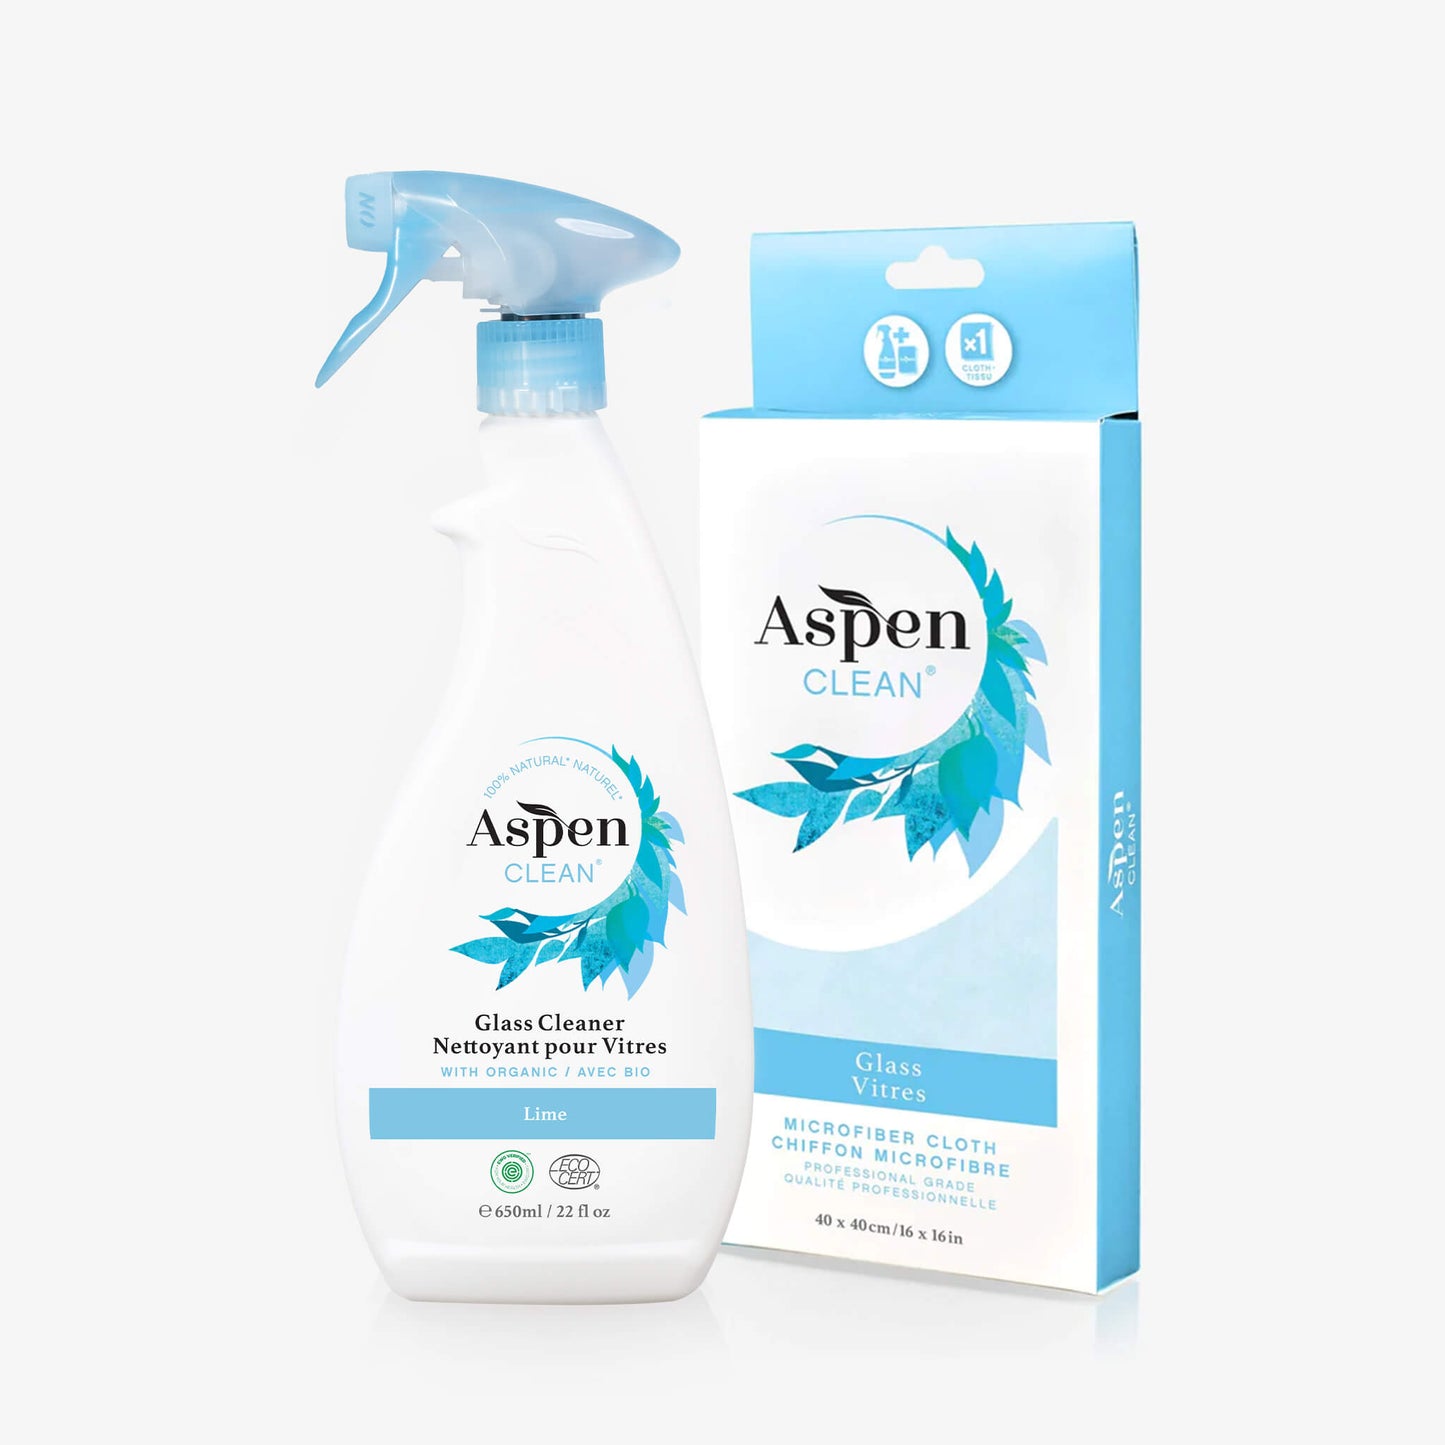 AspenClean Glass Cleaner 650ml and Glass Microfiber Cloth Kit